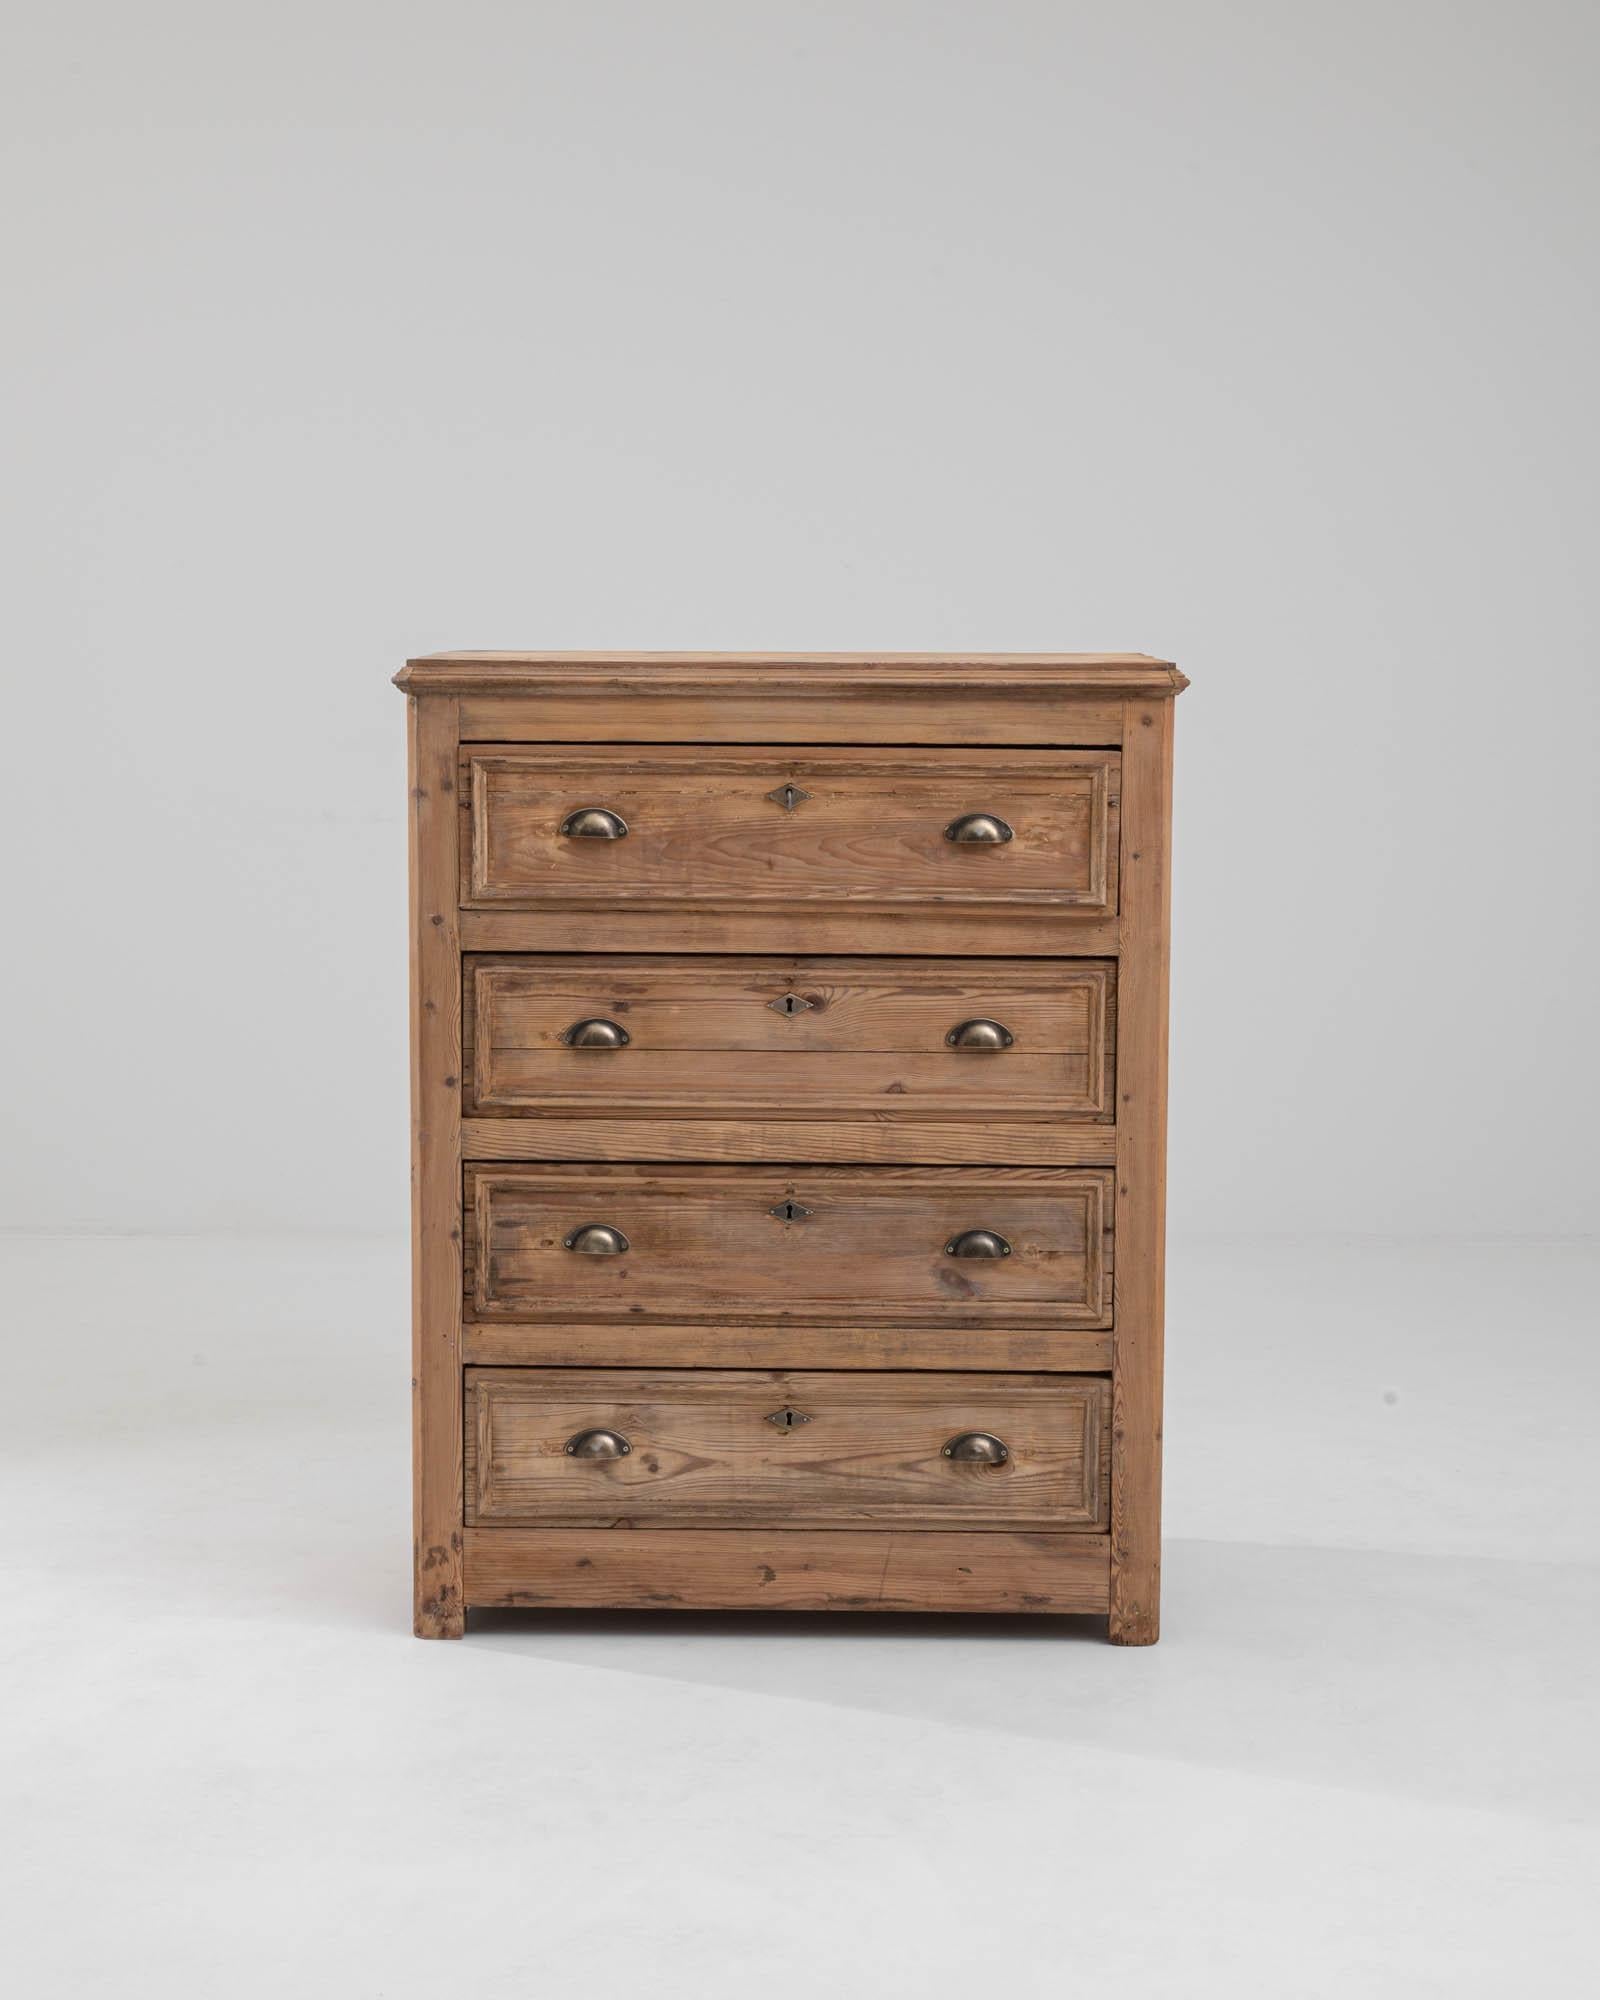 A wooden chest of drawers made in 19th century France. This chest contains four equally spacious drawers bearing brass cupped pulls and diamond-shaped keyholes. The condition of the wood has been remarkably preserved through the years, just a light